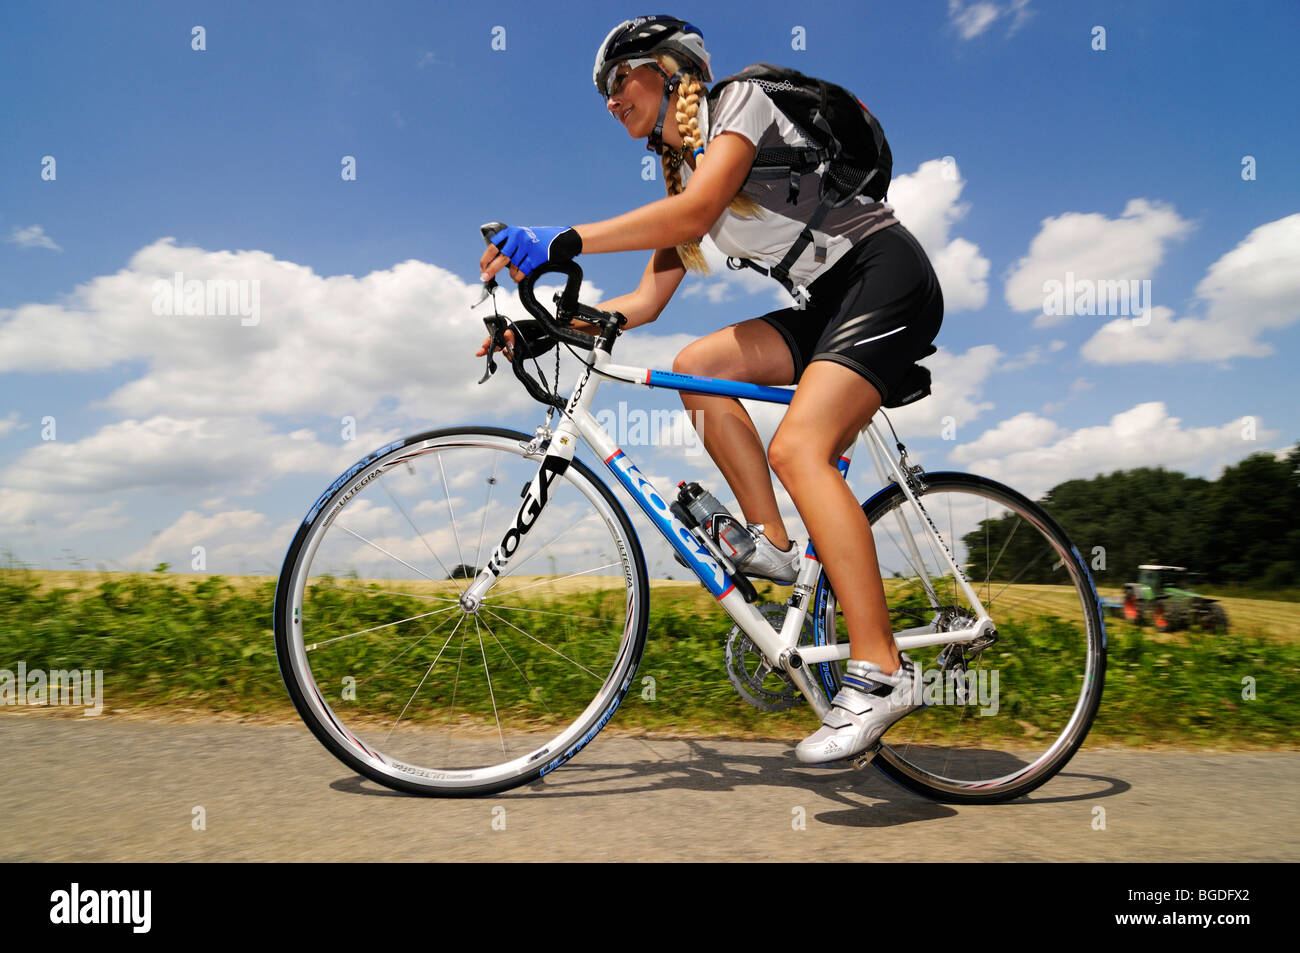 Young woman riding a bicycle, Bavaria, Germany, Europe Stock Photo